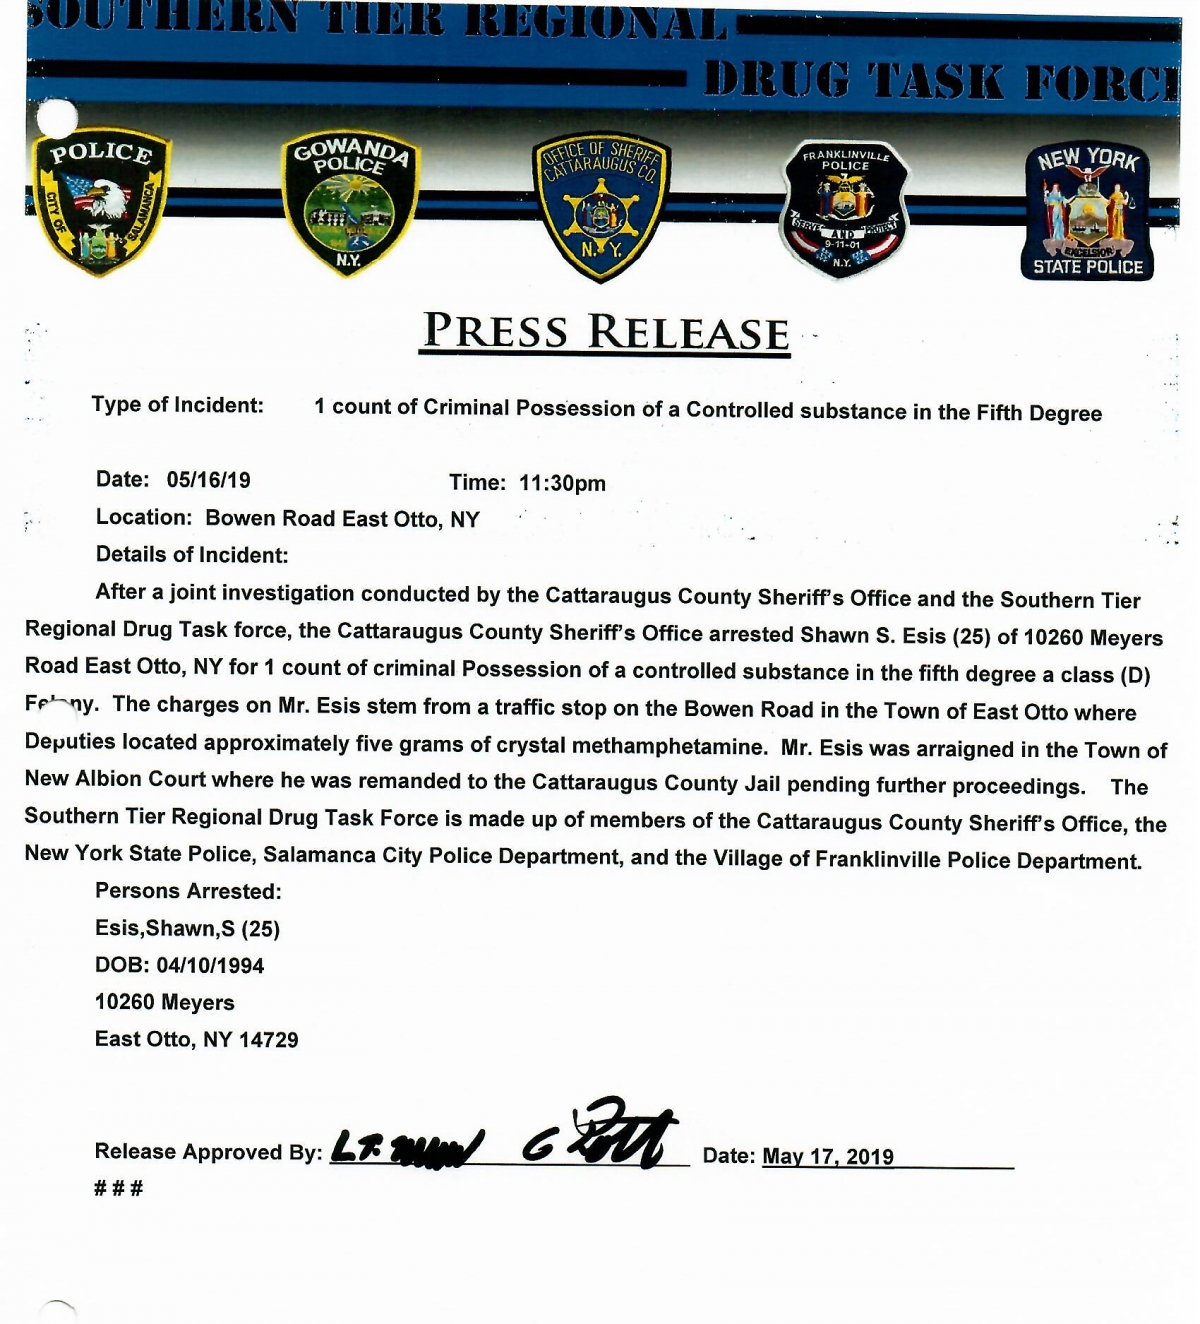 Press release from Sheriffs office about criminal possession of a controlled substance in East Otto